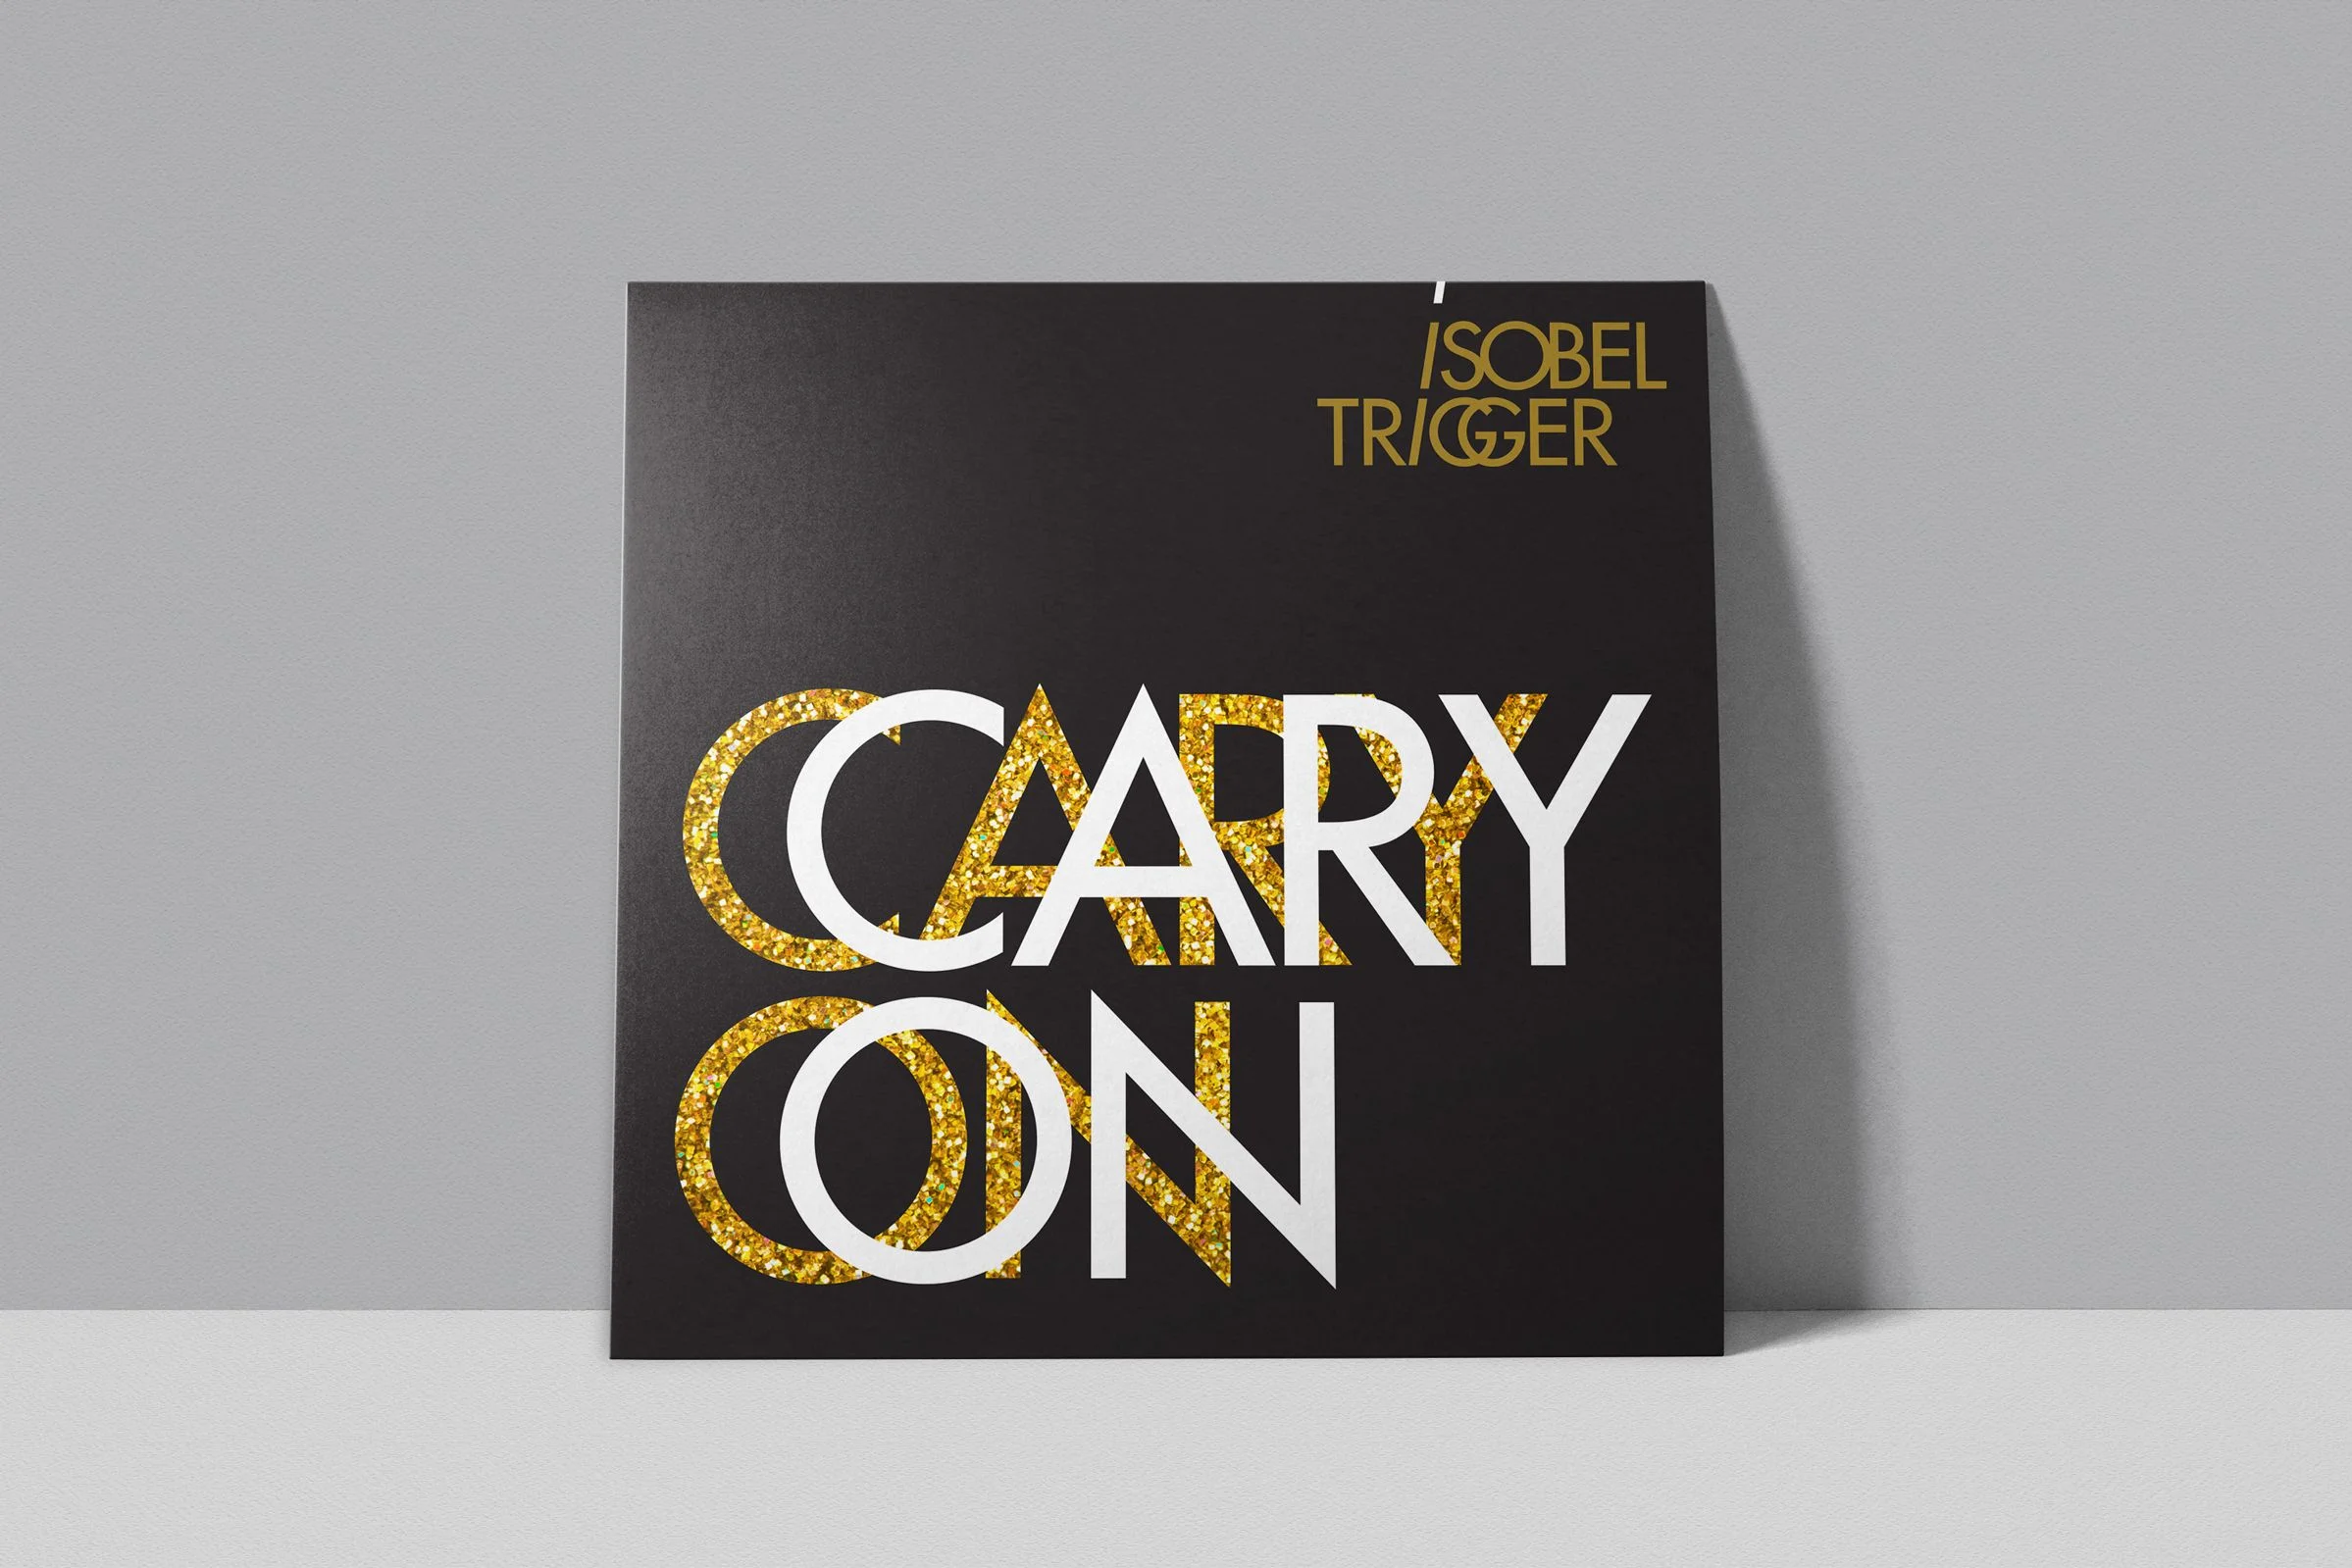 Album Cover for Isobel Trigger, a Canadian Rock Band by Ottawa Graphic Designer idApostle